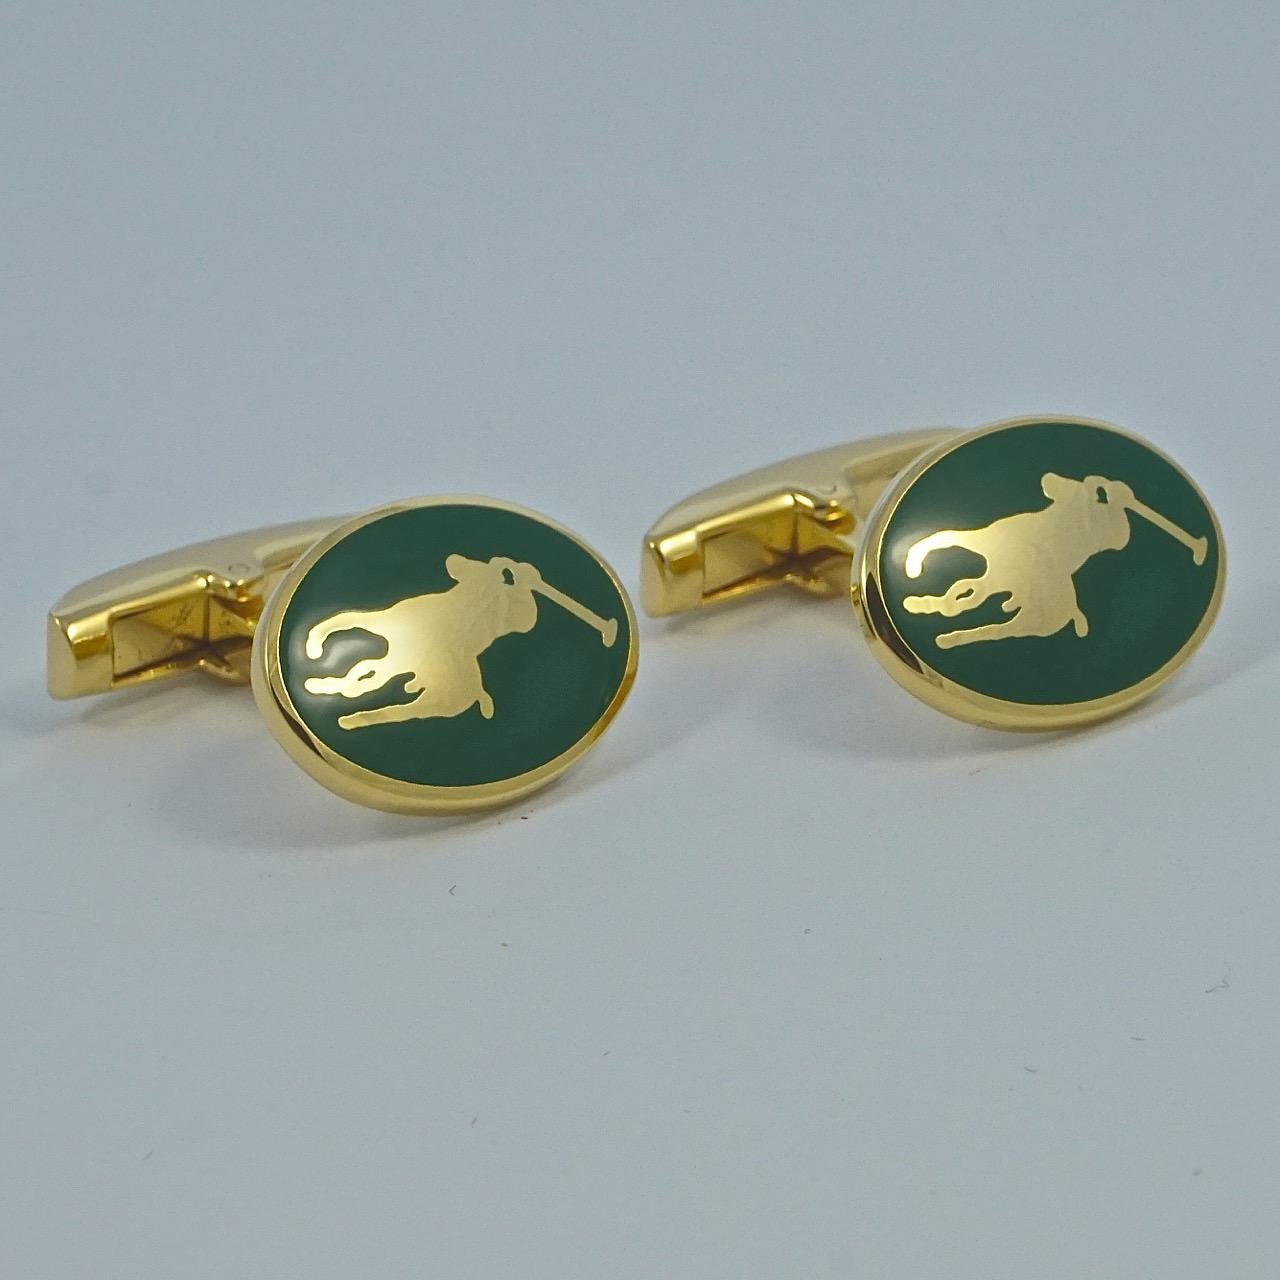 Ralph Lauren gold plated and green enamel polo cufflinks. Measuring 1.9cm / .75 inch by 1.4cm / .55 inch. The cufflinks are marked for Ralph Lauren, Made in England. They are in very good condition, and will arrive in their original Ralph Lauren